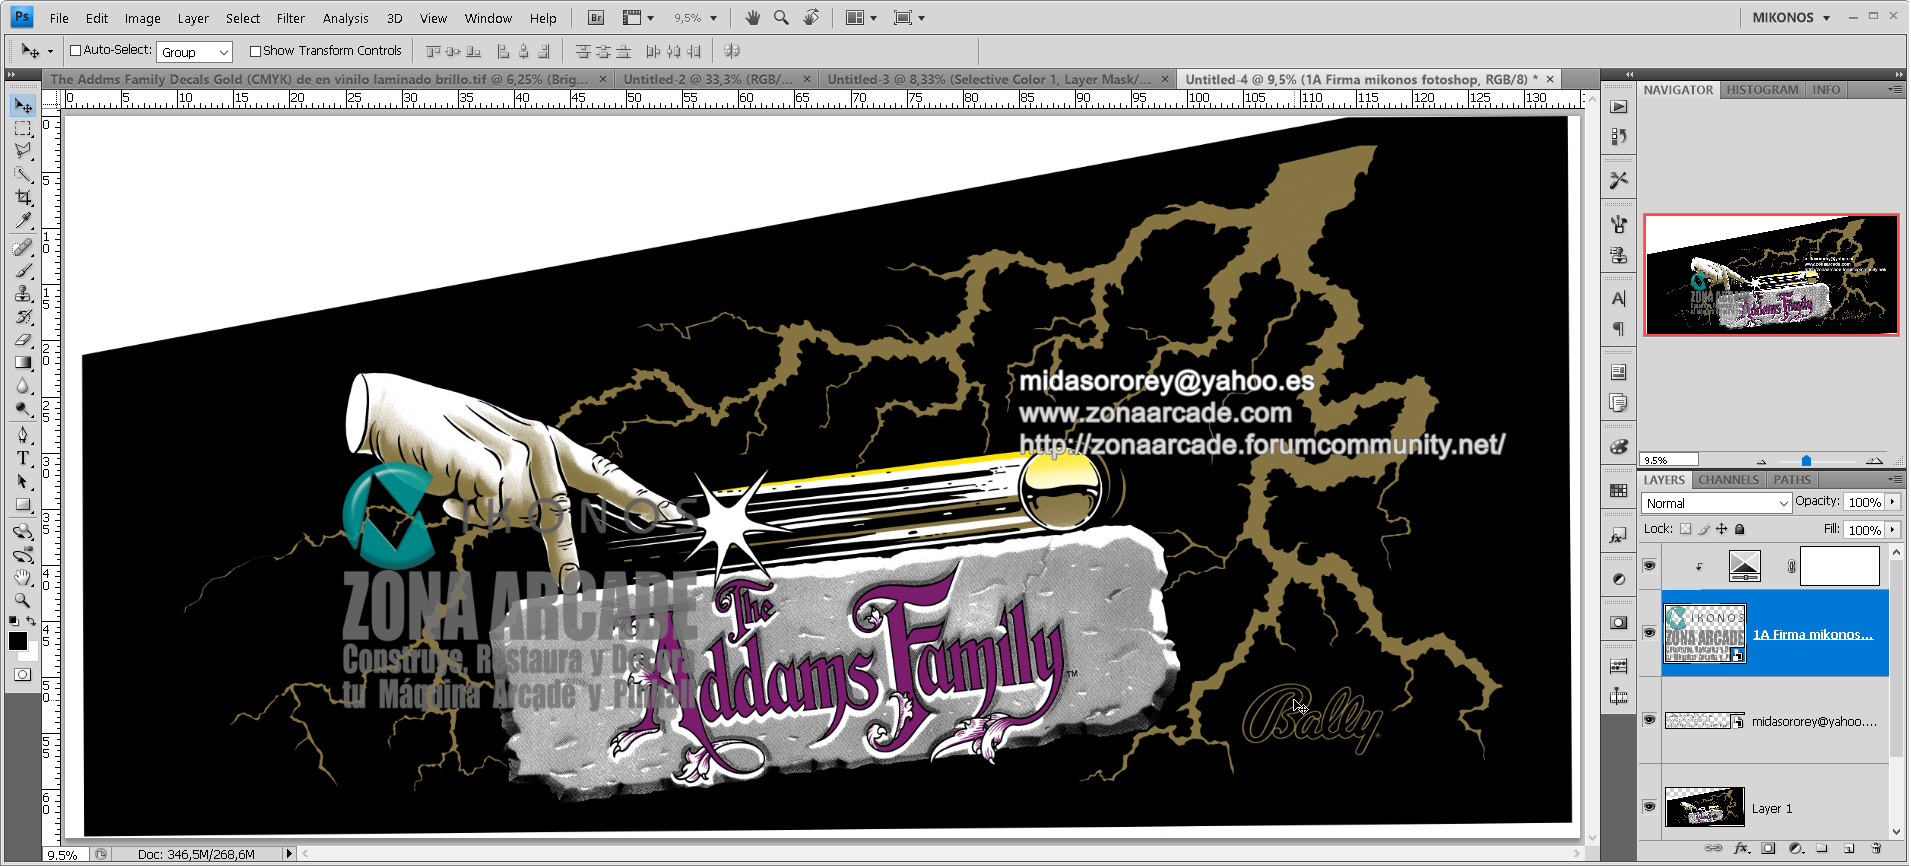 The-Addams-Family-Pinball-Main-Right-Side-Art-Decal-Gold-Edition-Mikonos1